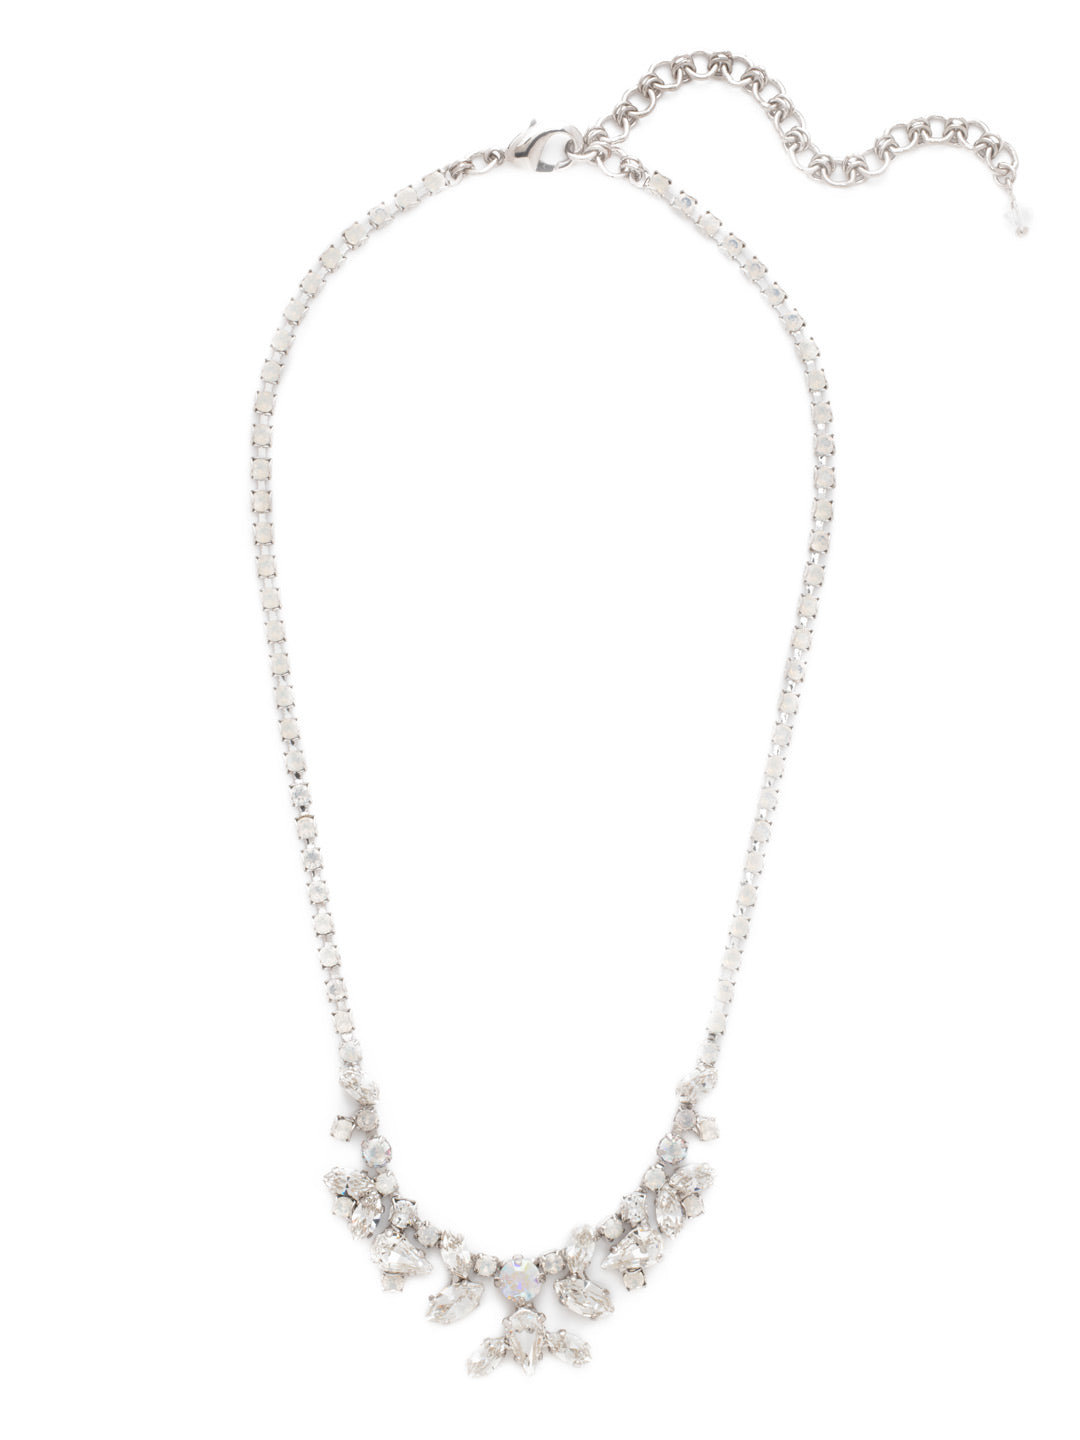 Cluster Bib Statement Necklace - NDP4RHWBR - <p>This bib necklace features a floral inspired crystal design. From Sorrelli's White Bridal collection in our Palladium Silver-tone finish.</p>